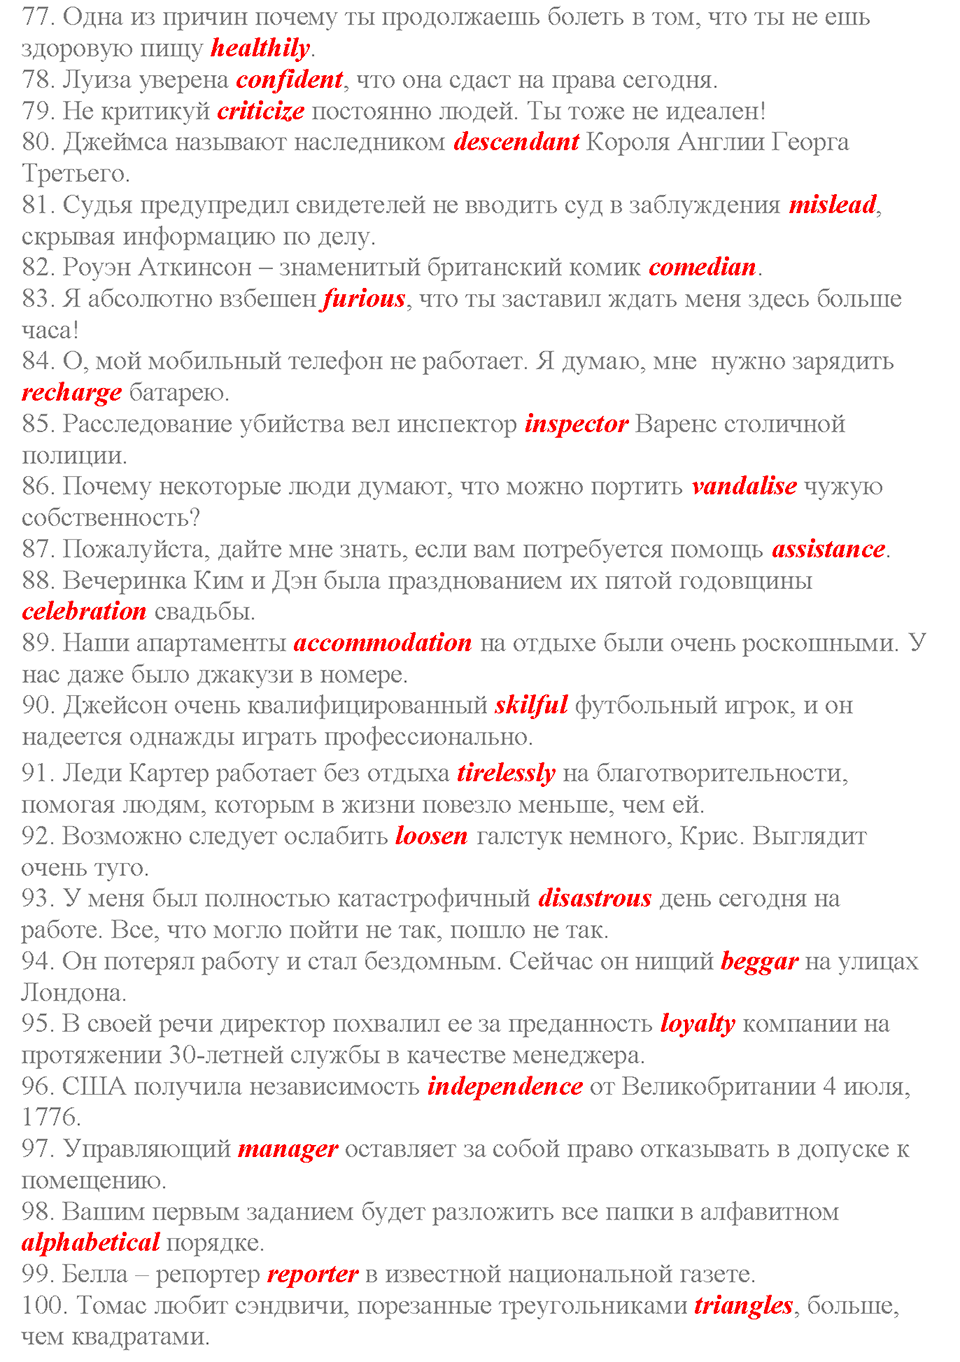 Word formation 7. Word formation 7 класс Starlight. Word formation 7 класс английский язык. Word formation Старлайт. Английский 8 класс Starlight wf2.